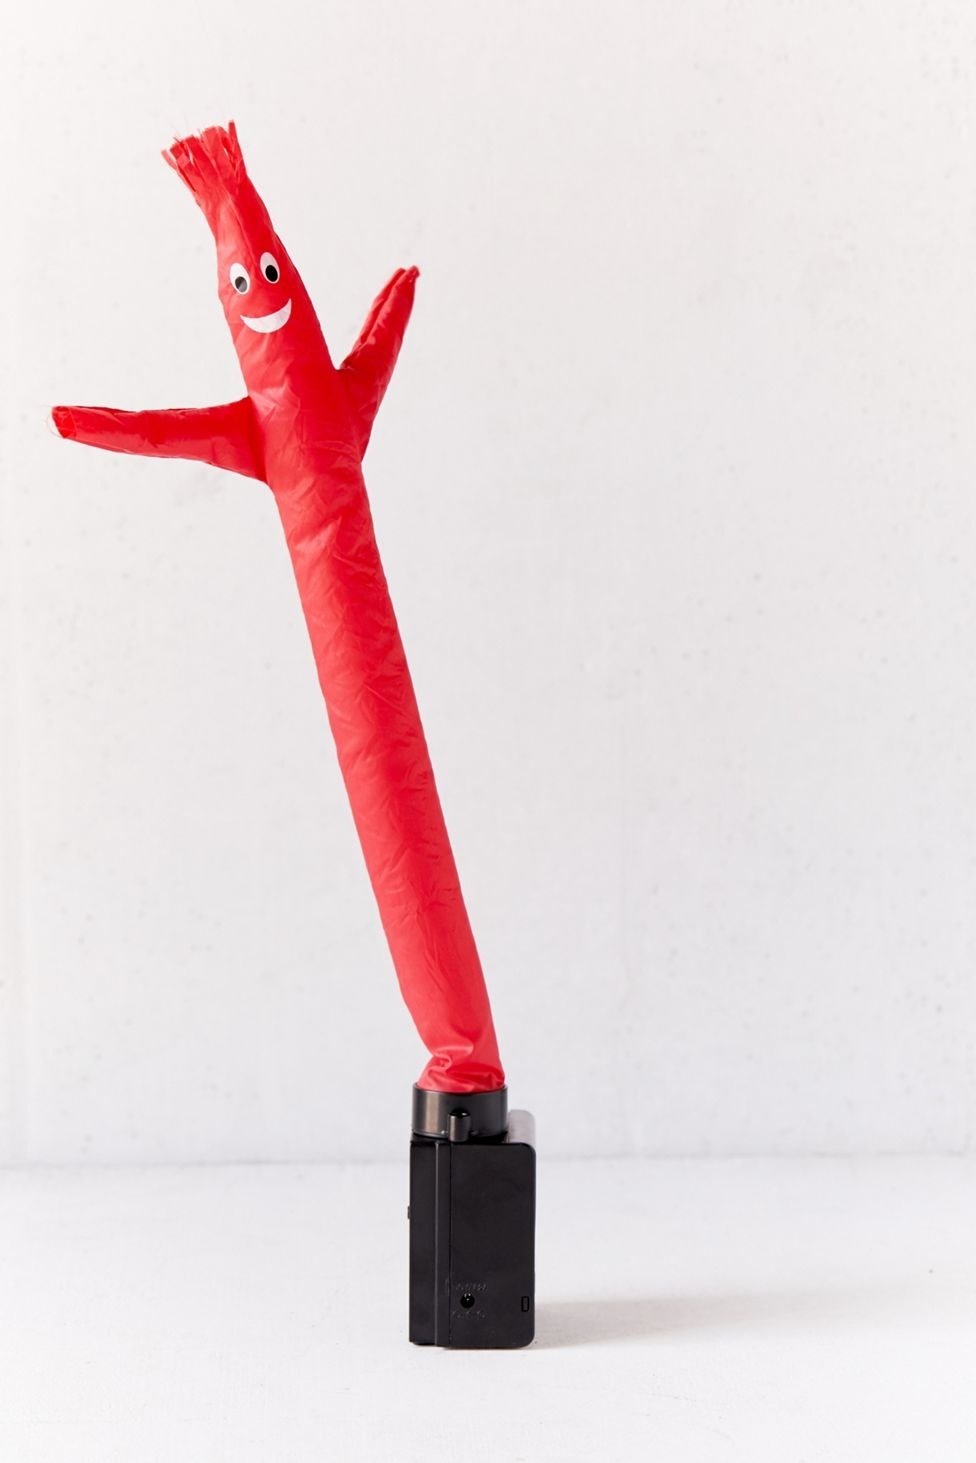 red tube guy on a black stand